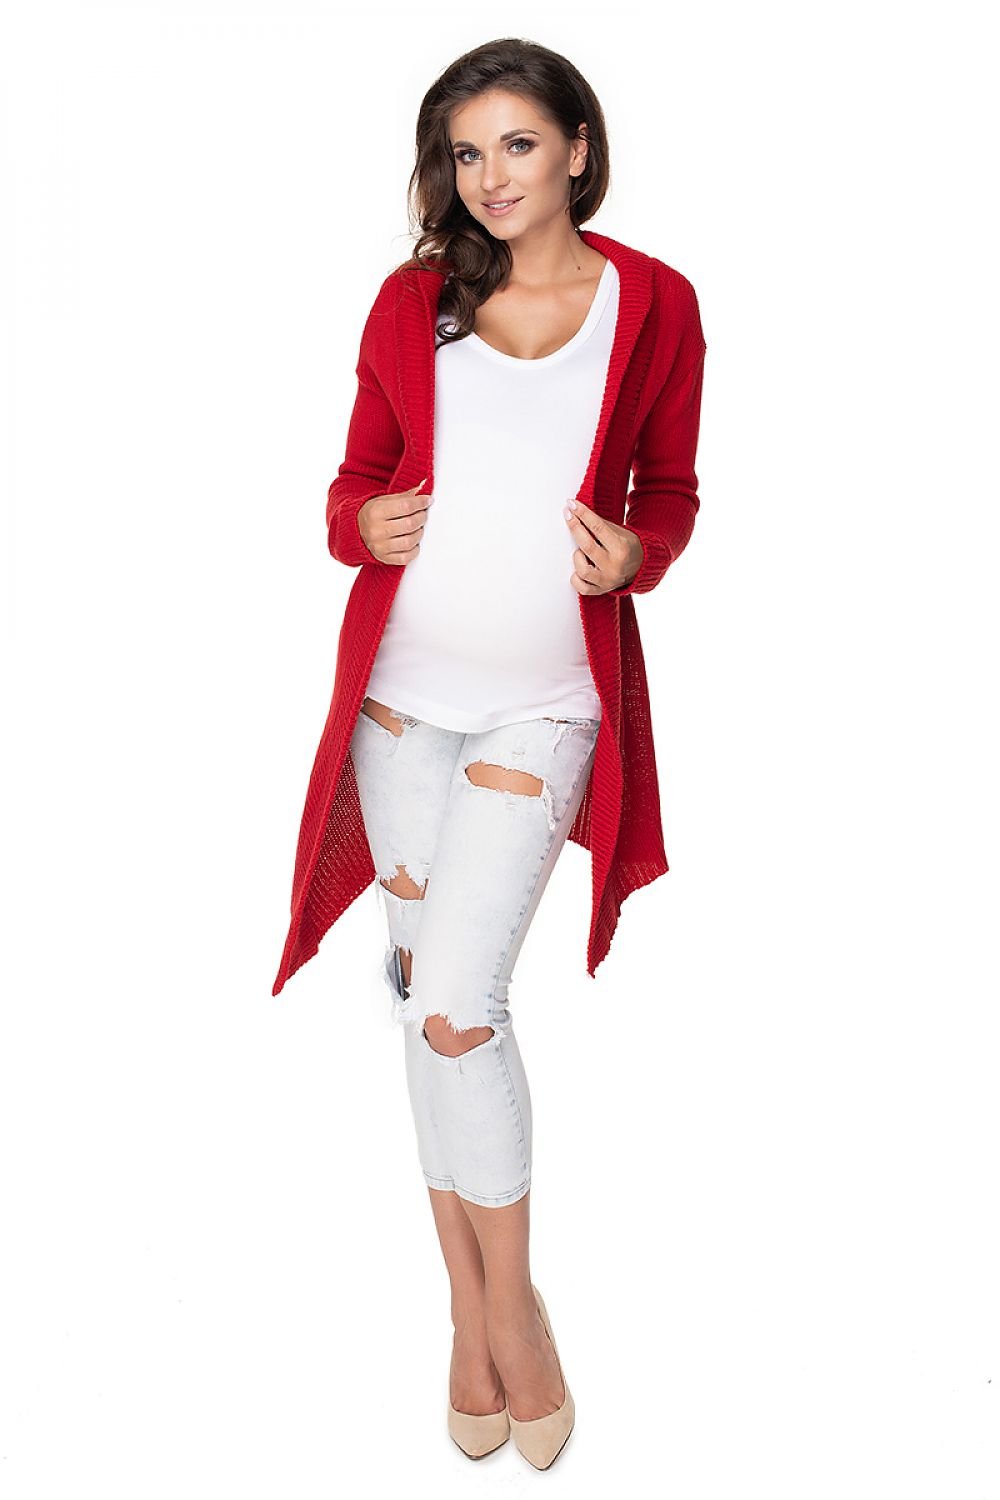 Cardigan model 138237 Red by PeeKaBoo - One Size - Cardigans